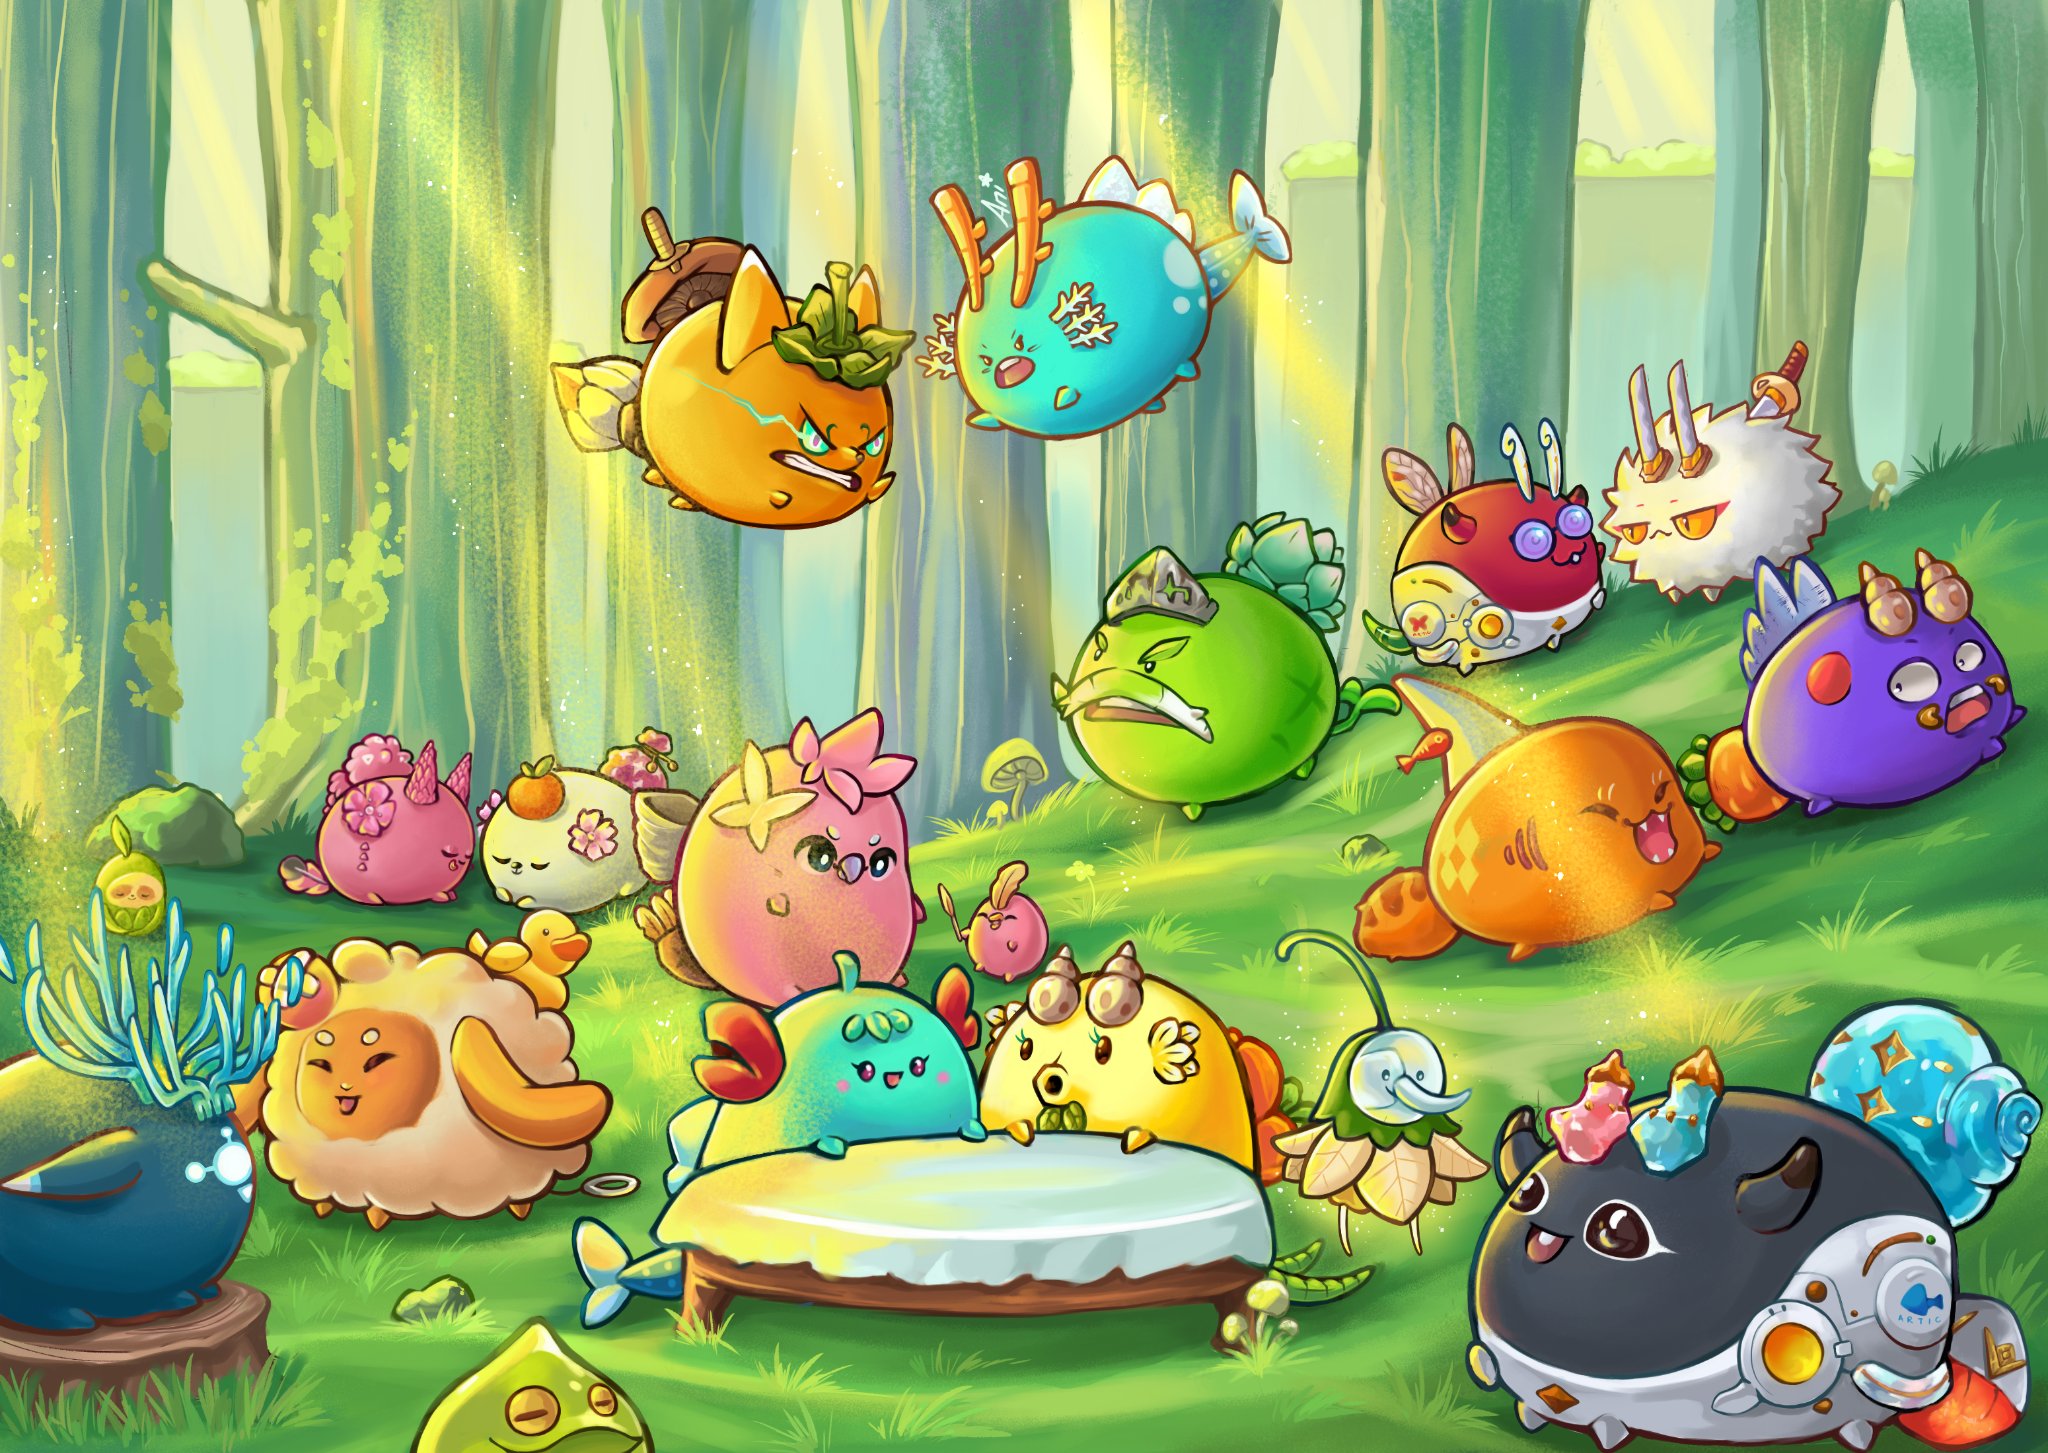 RT ariandtwt: New friends. 🌟  This is my entry to #ArticOriginContest ~! Our new and old friends ready to take on a new amazing journey in Axie Origin. Let's go with them!   Thank youuu so much for this opportunity Artic.  I really hope you like it. 🌸 [twitter.com] [pbs.twimg.com]